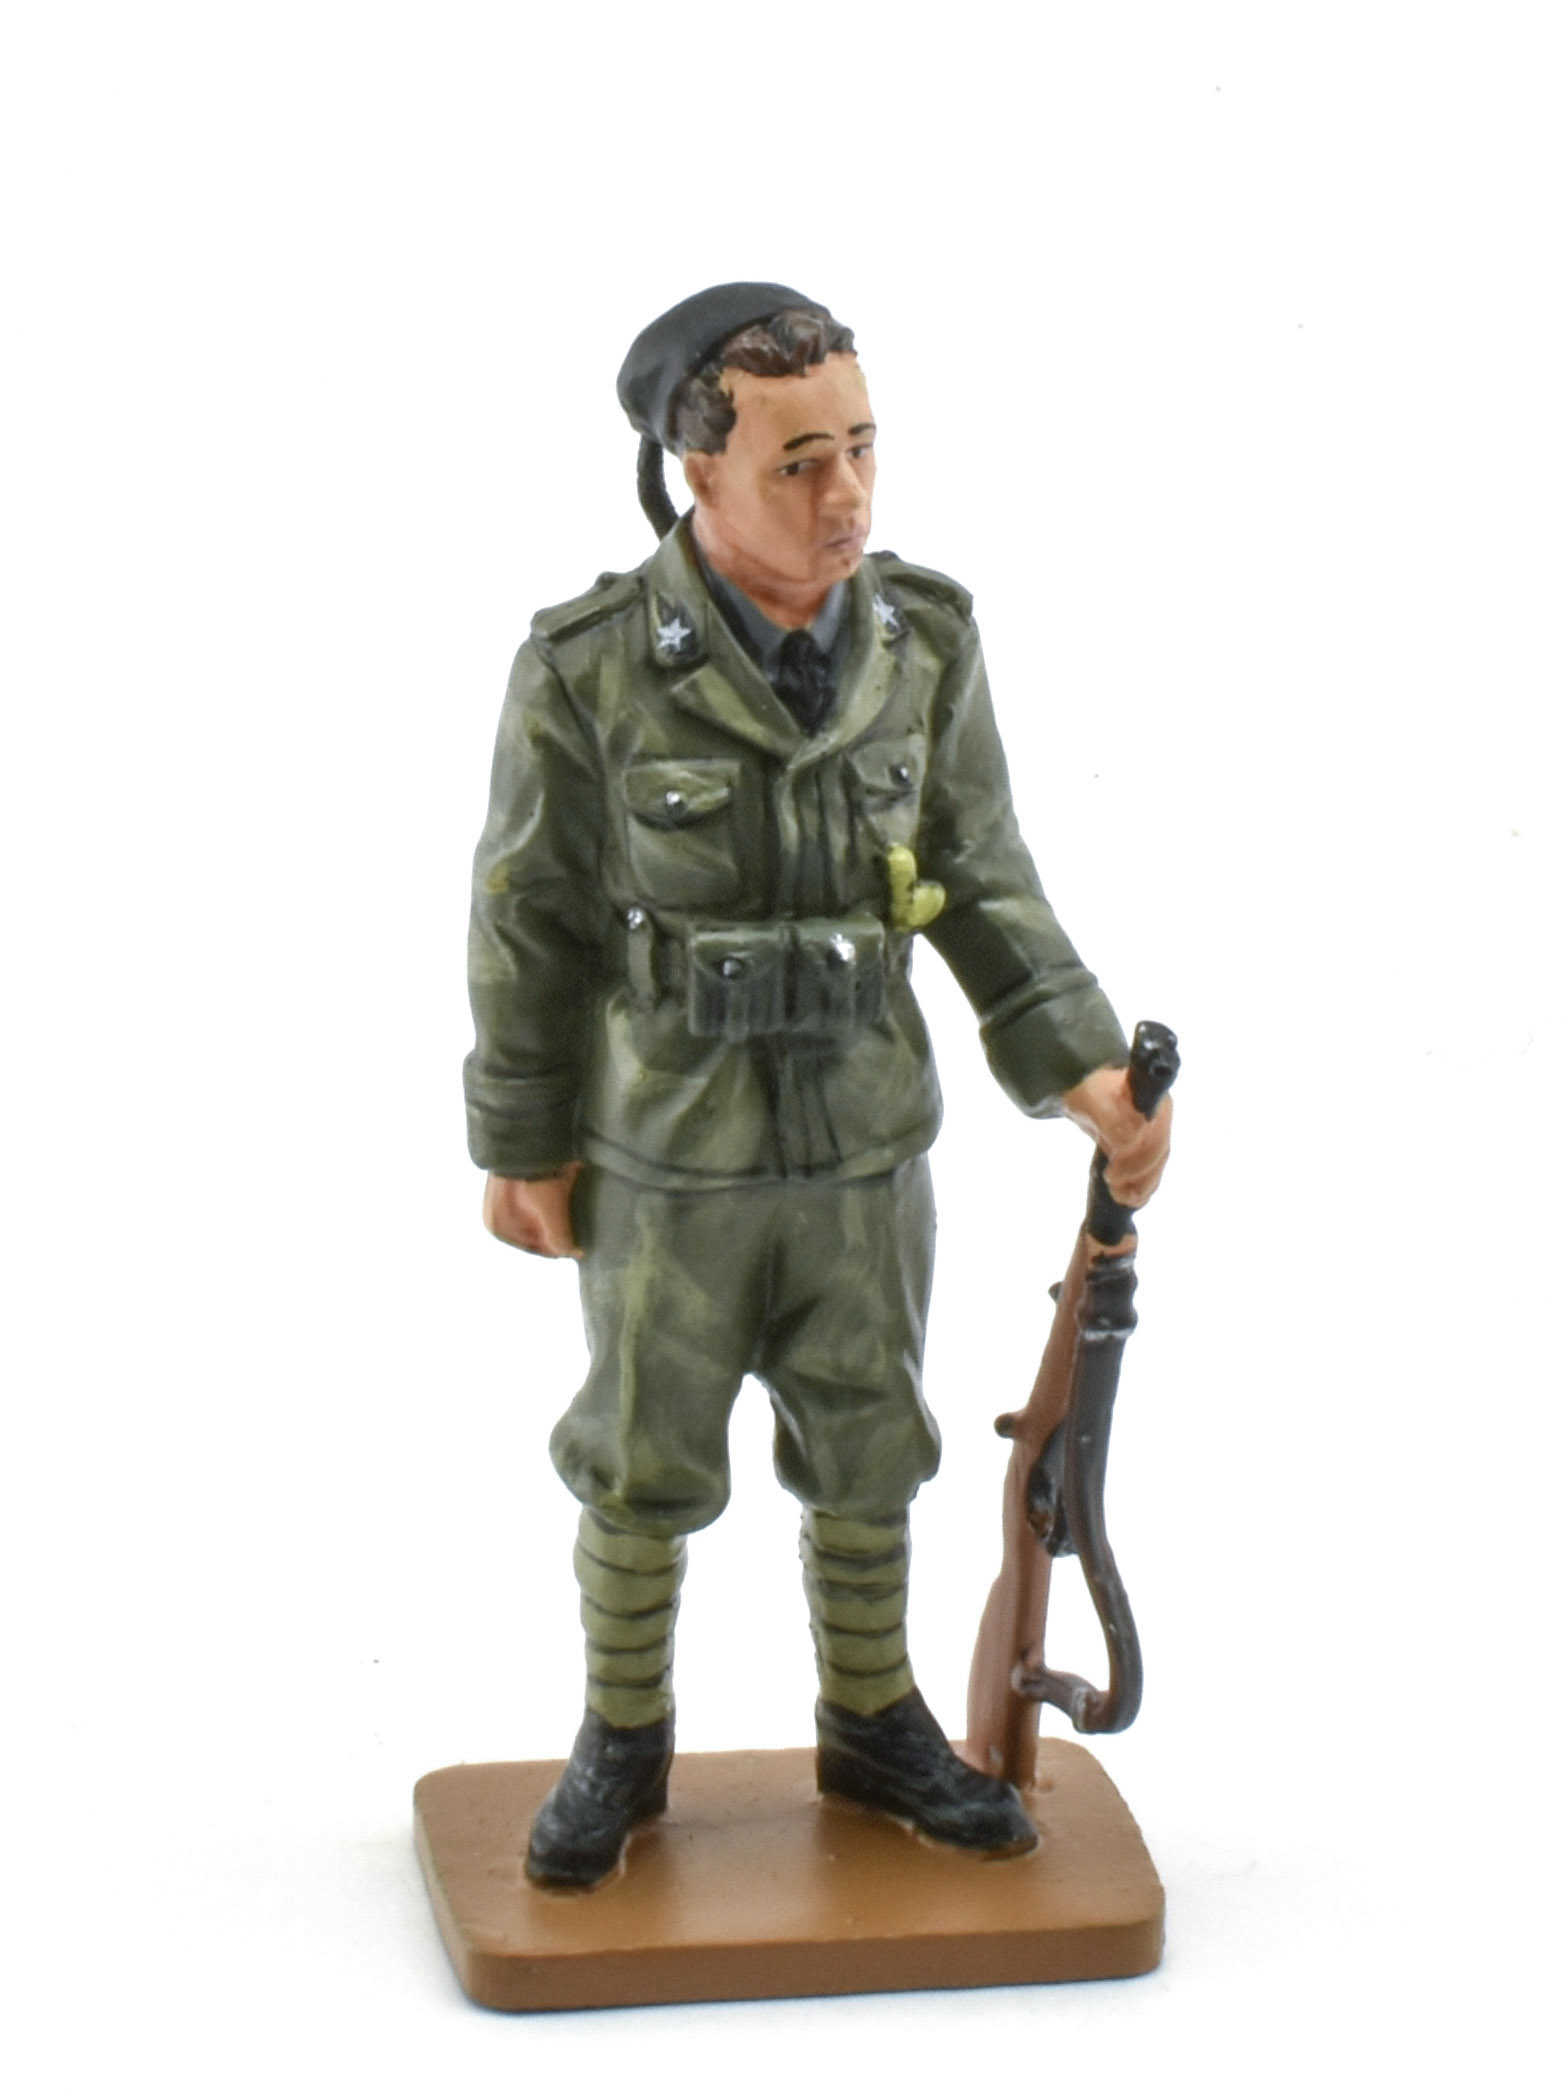 "ARDITO" (INFANTRY SOLDIER)